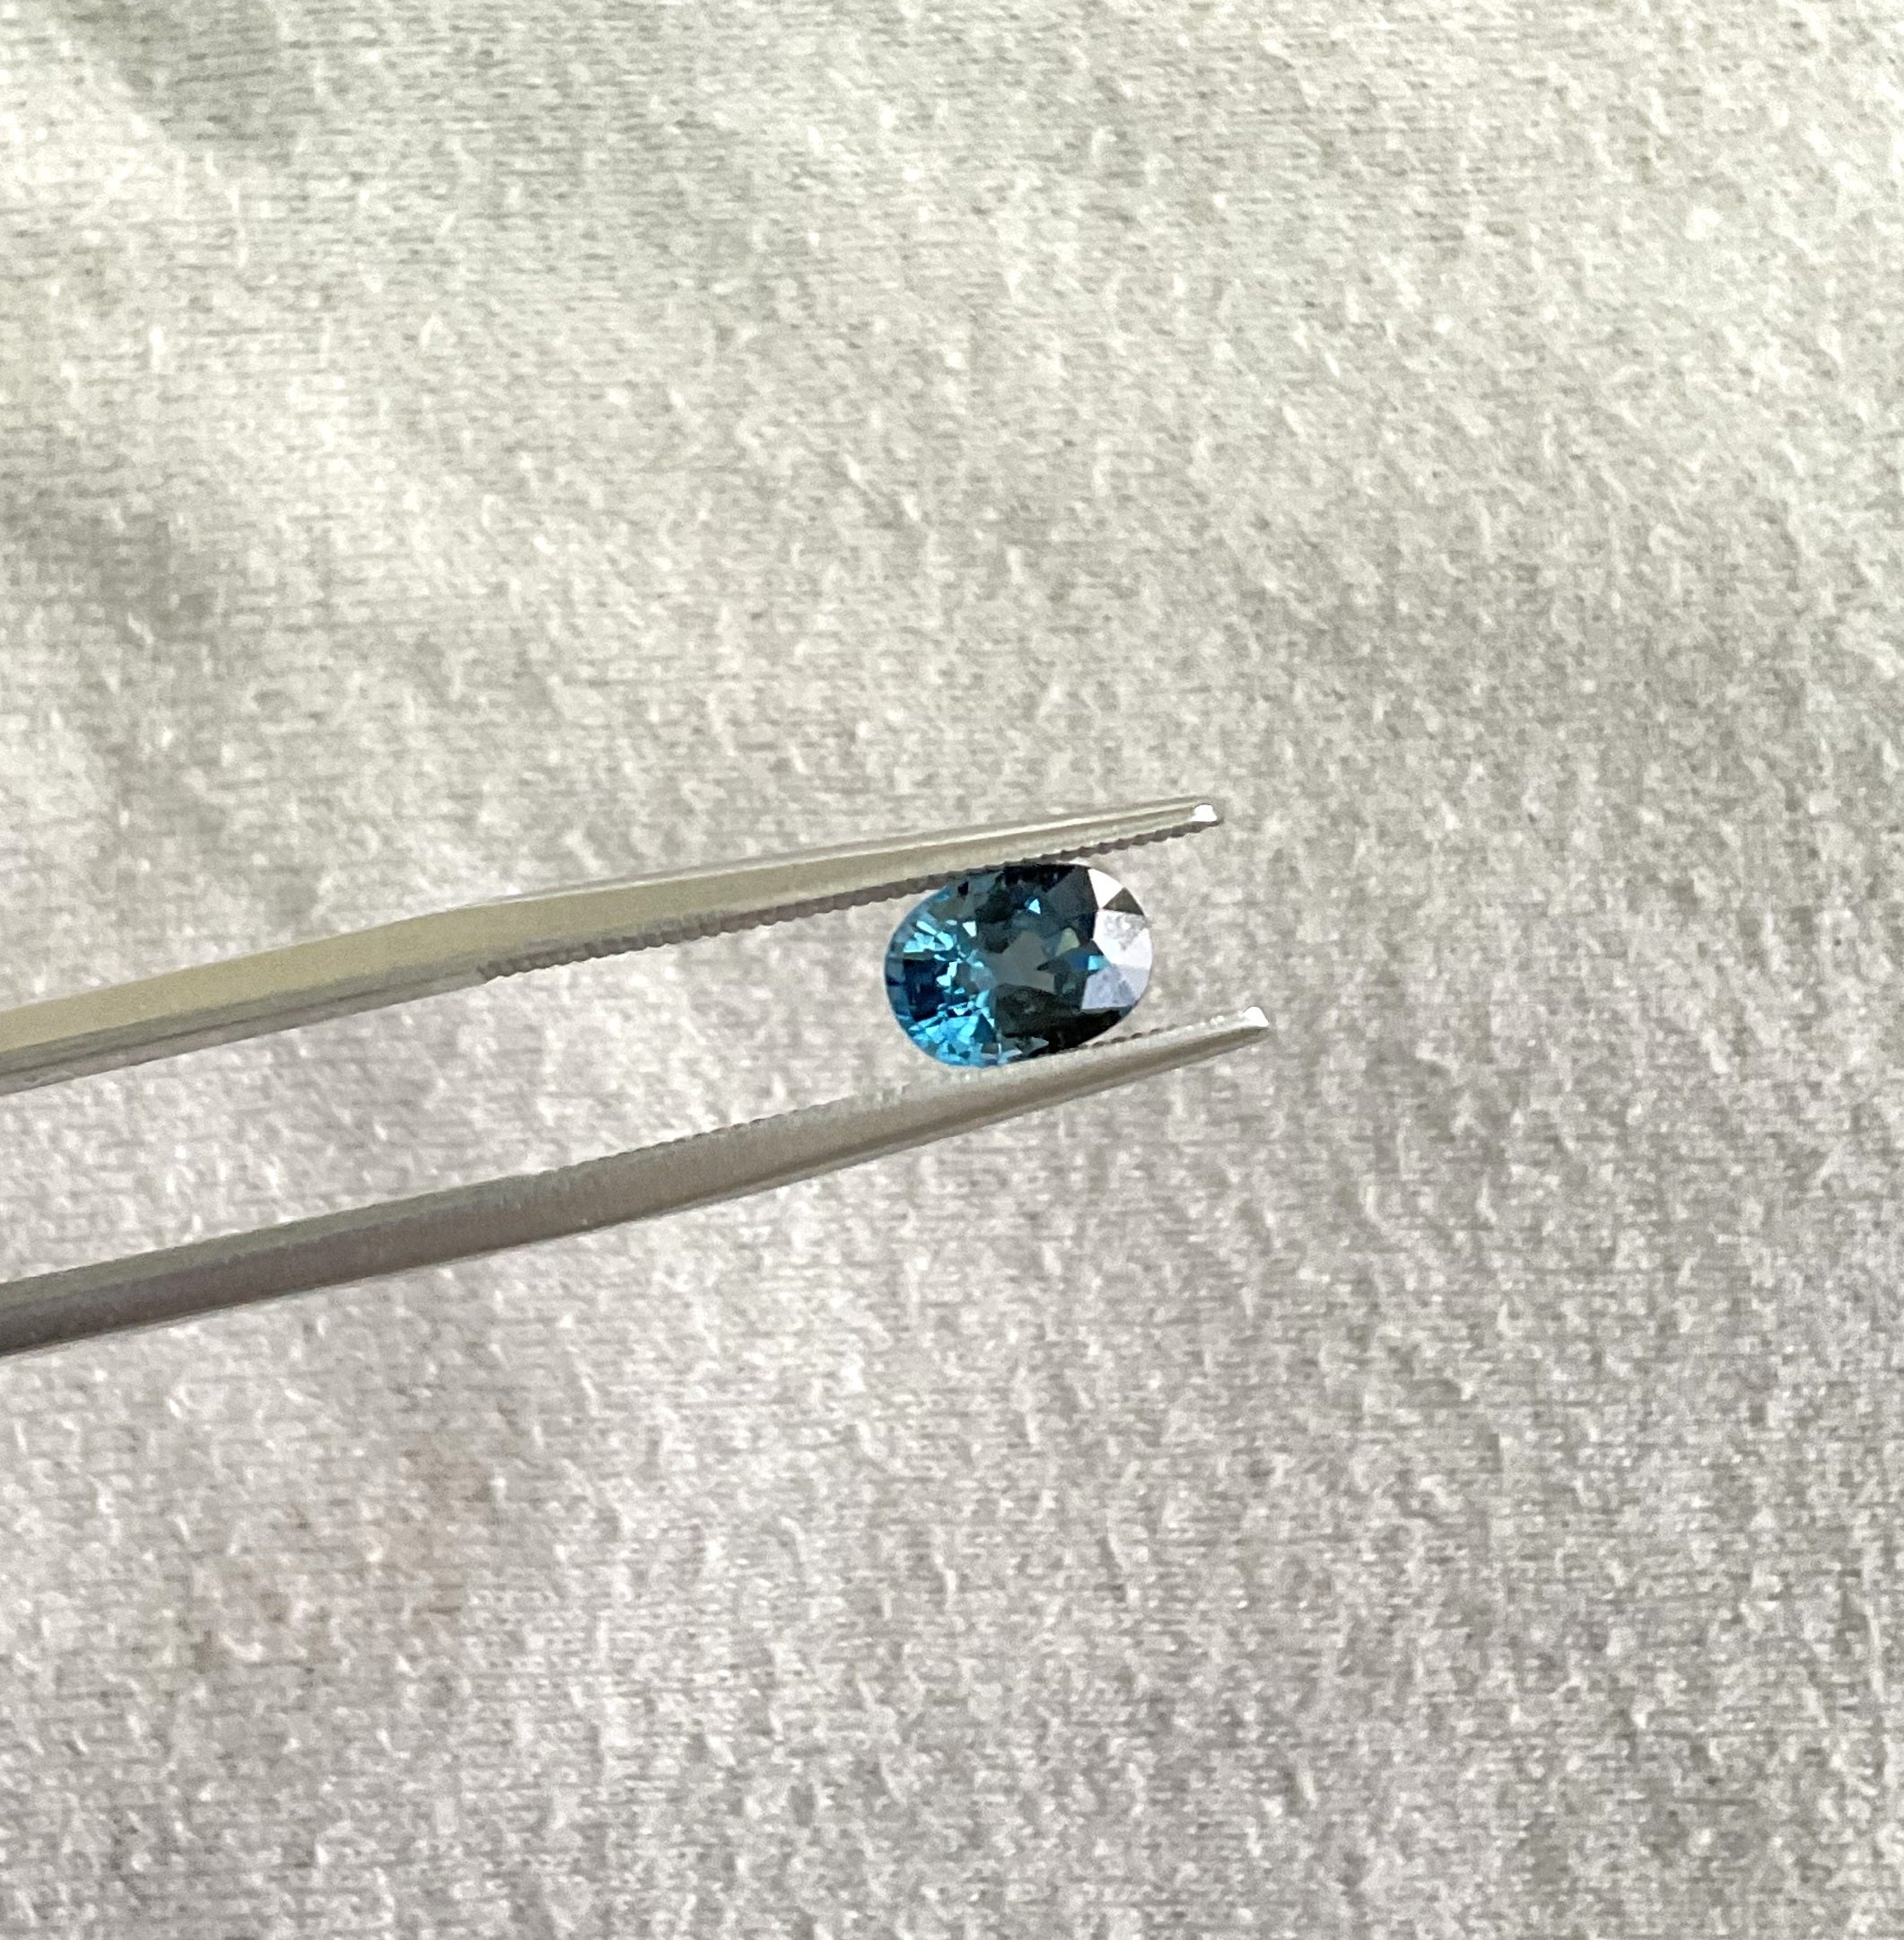 Tanzania Blue Spinel Oval Faceted Natural Cut Stone for Jewelry
Weight - 1.06 Ct
Size - 7x5x4 mm
Shape - Oval
Quantity - 1 Piece